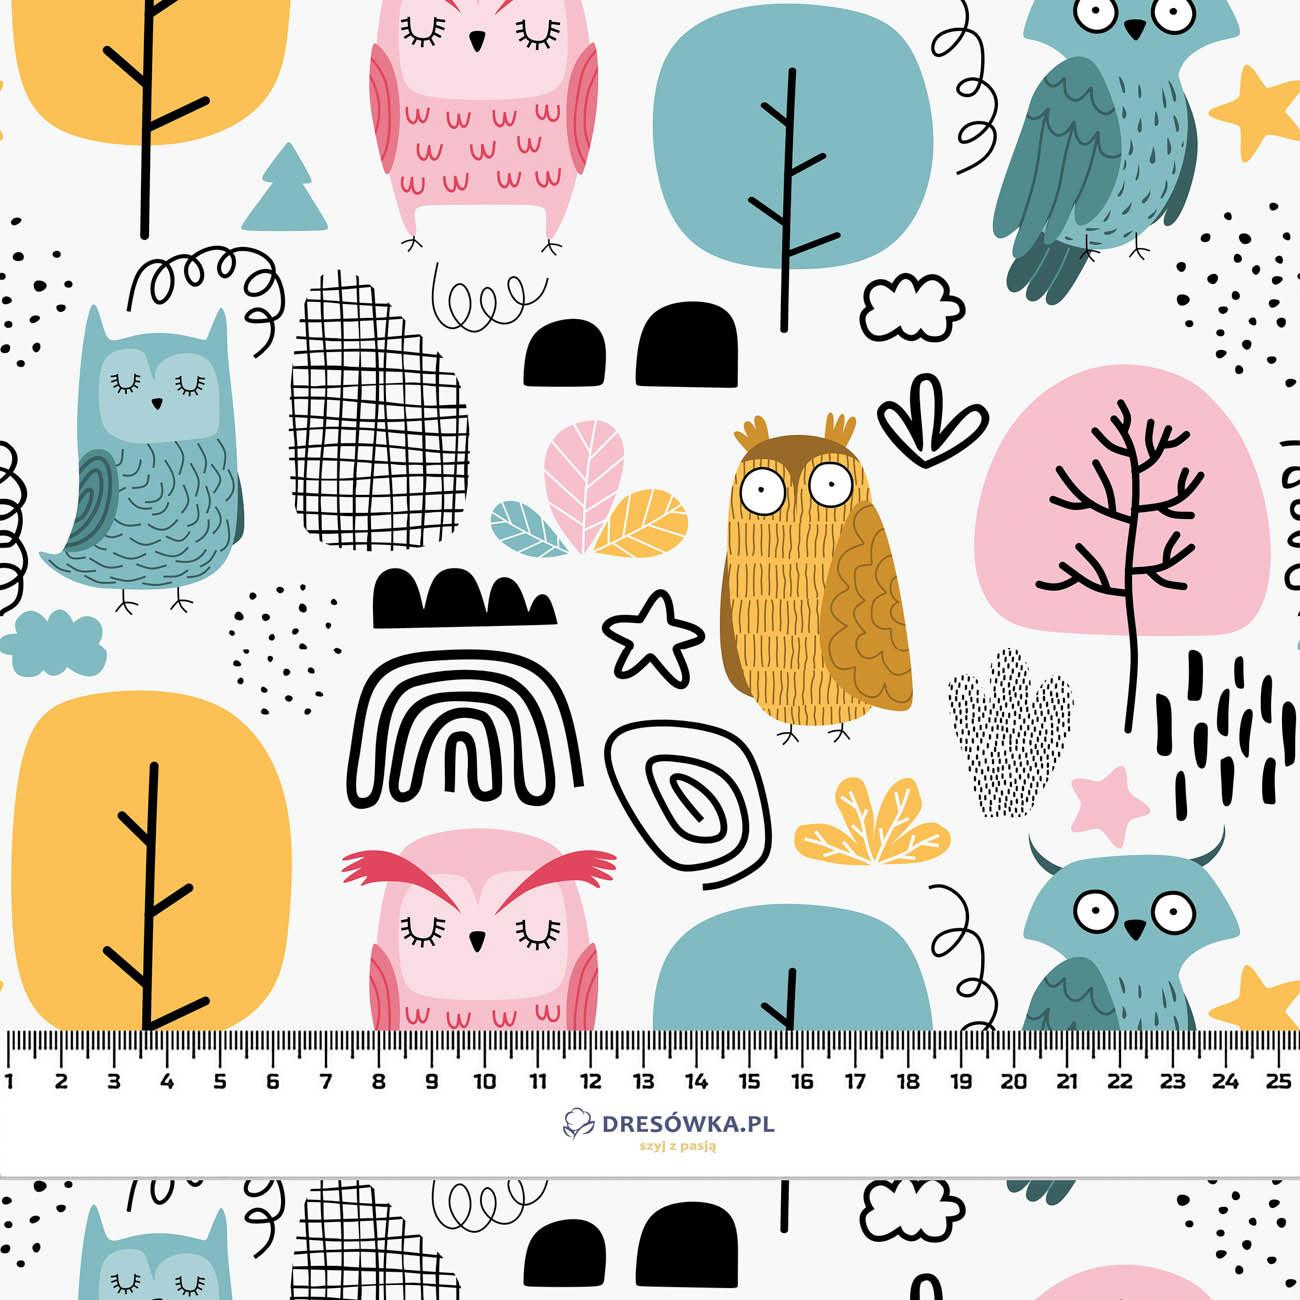 PAINTED OWLS - Waterproof woven fabric